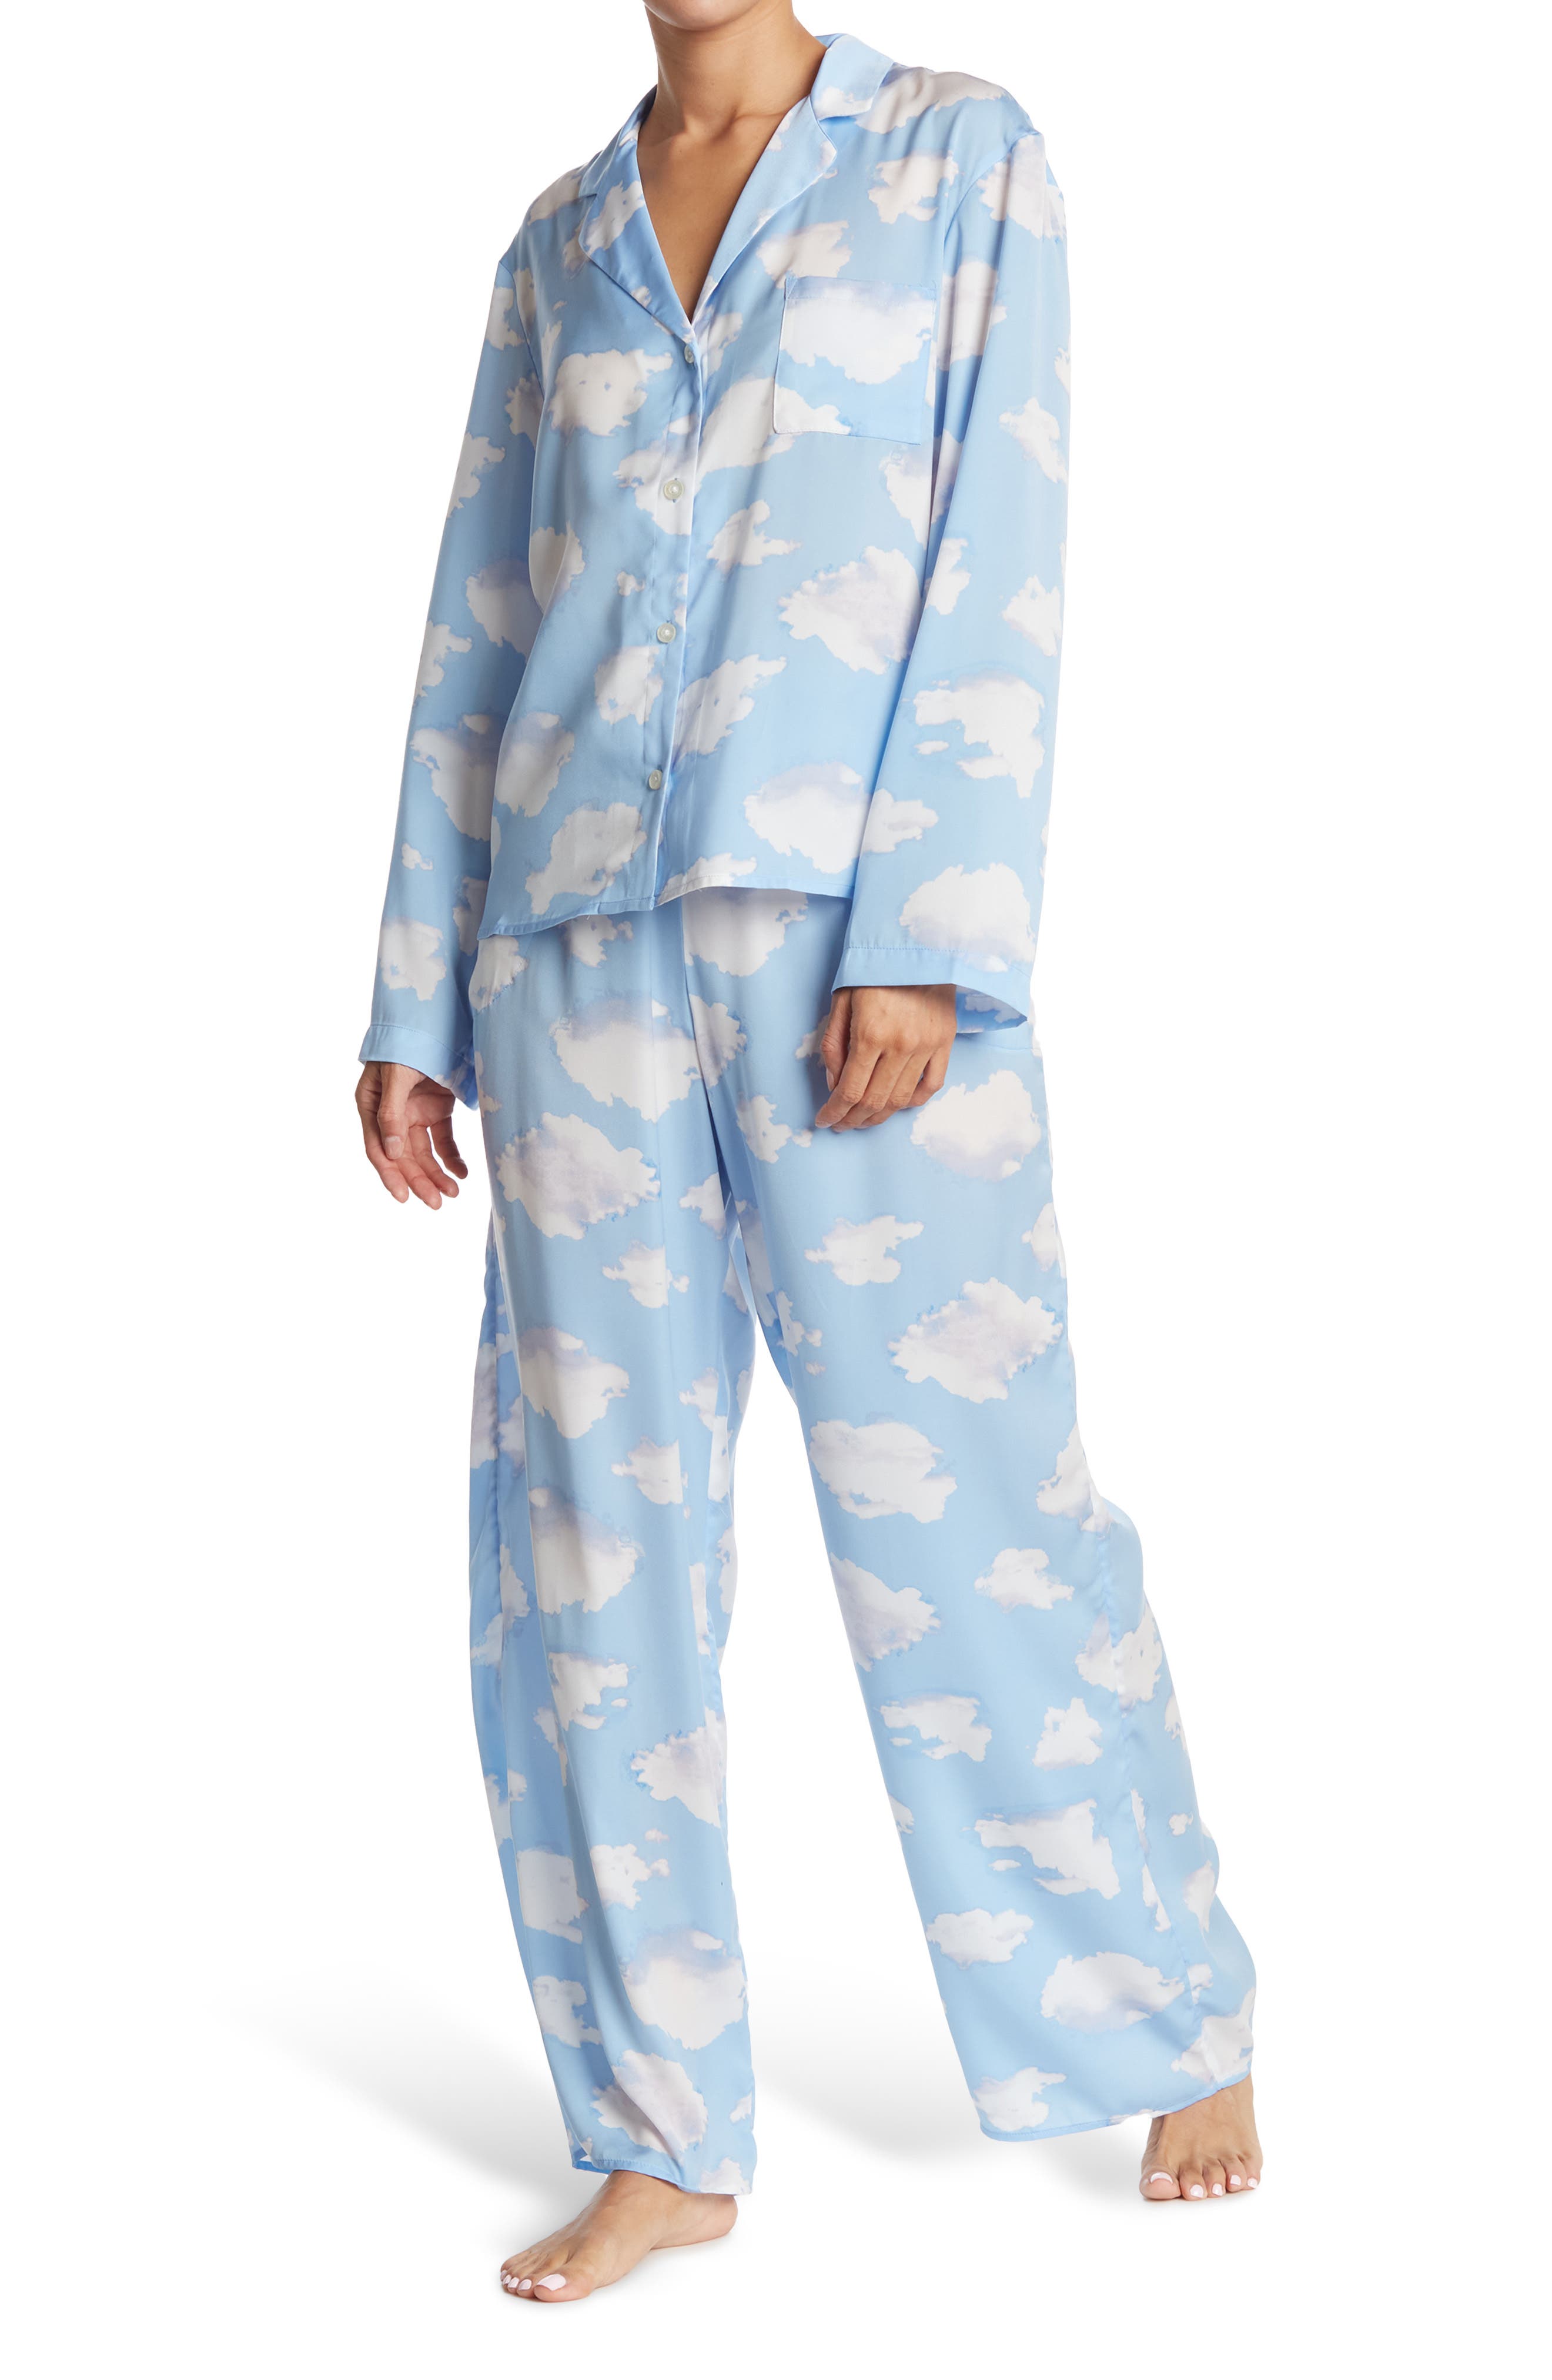 Shady Lady Women's Long Sleeve Button Down and Long Pant Pajama